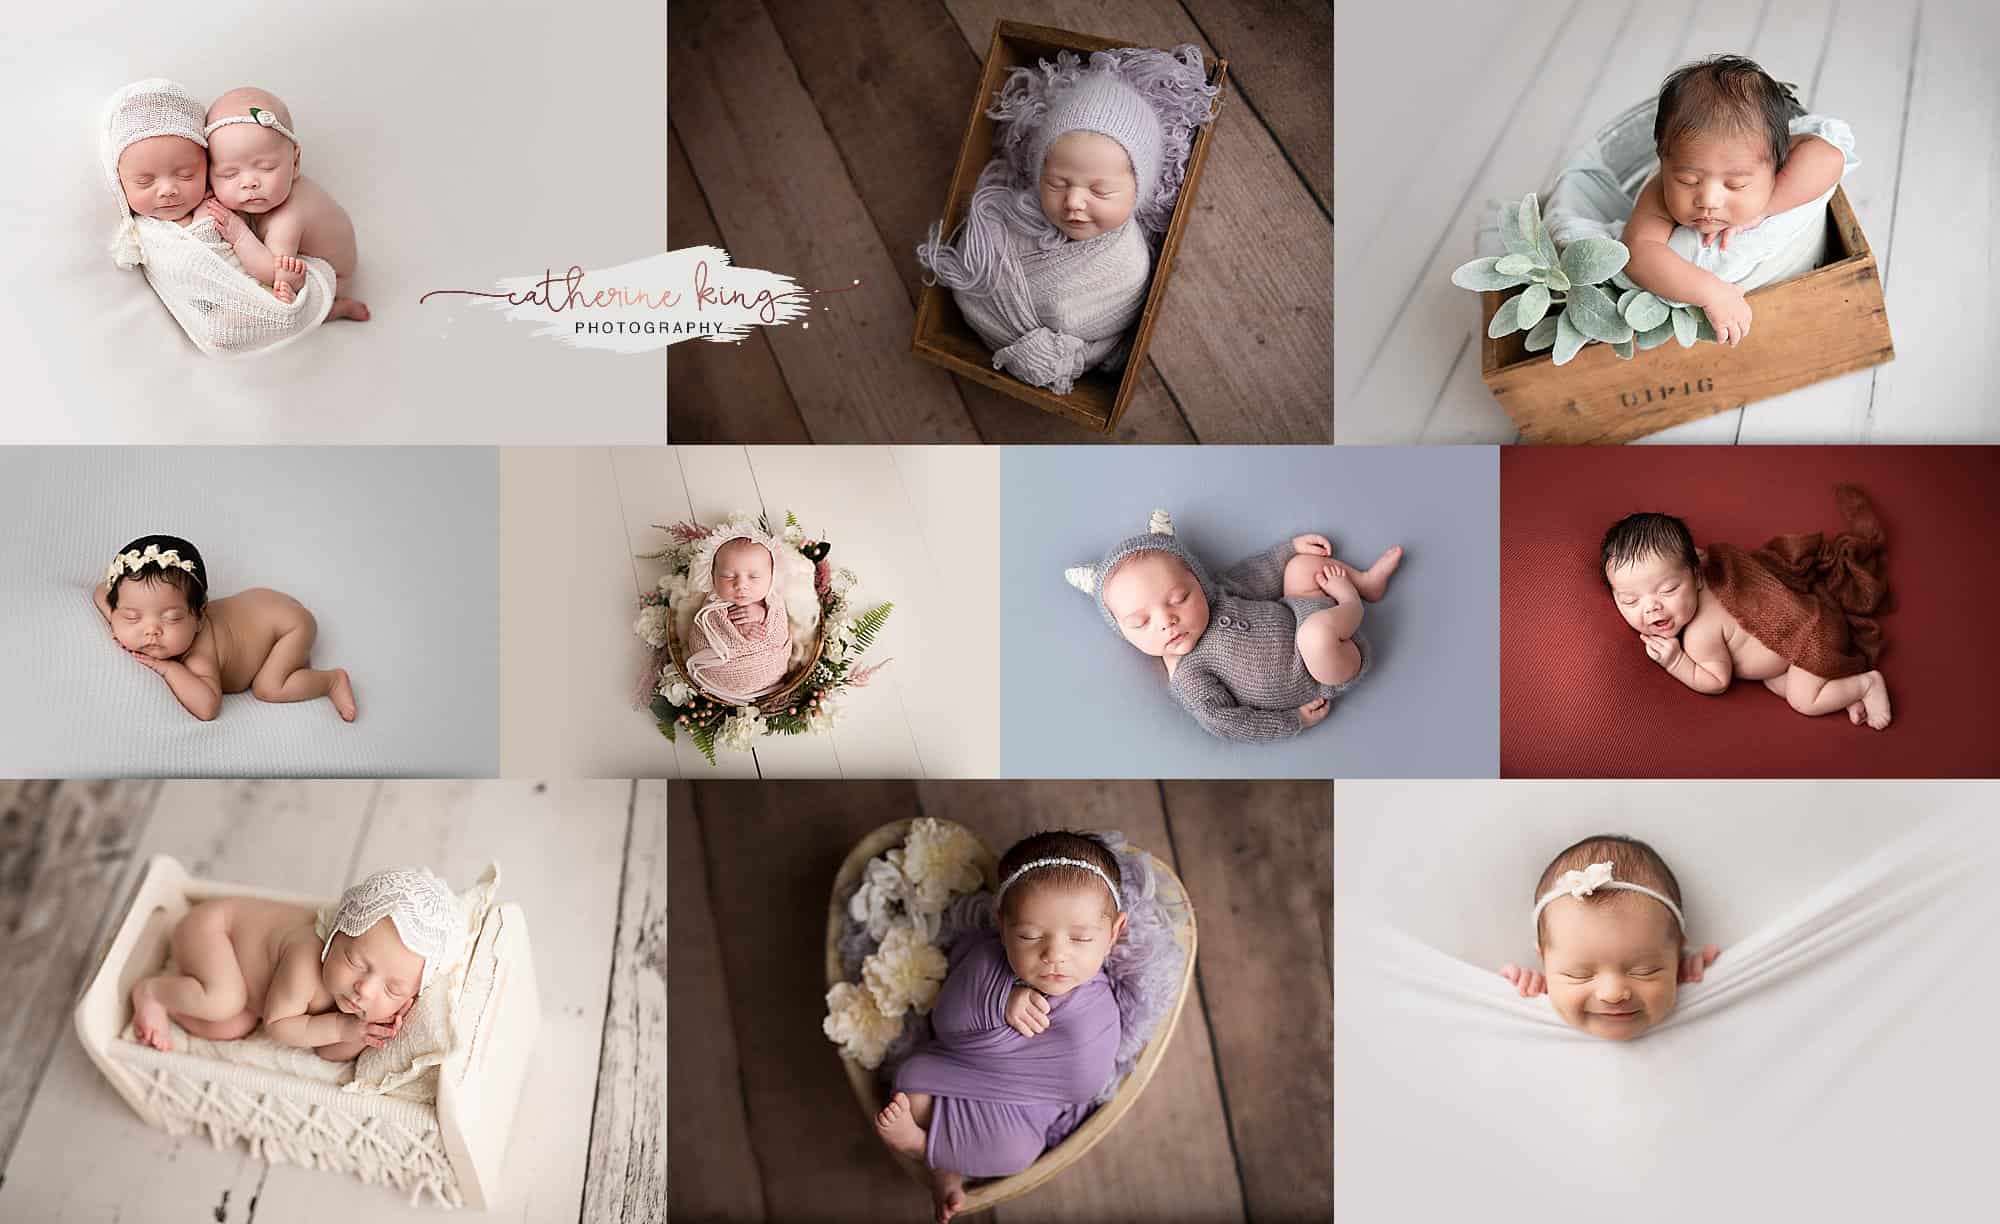 Catherine King awarded Mastery certificate for Newborn Photography by NAPCP